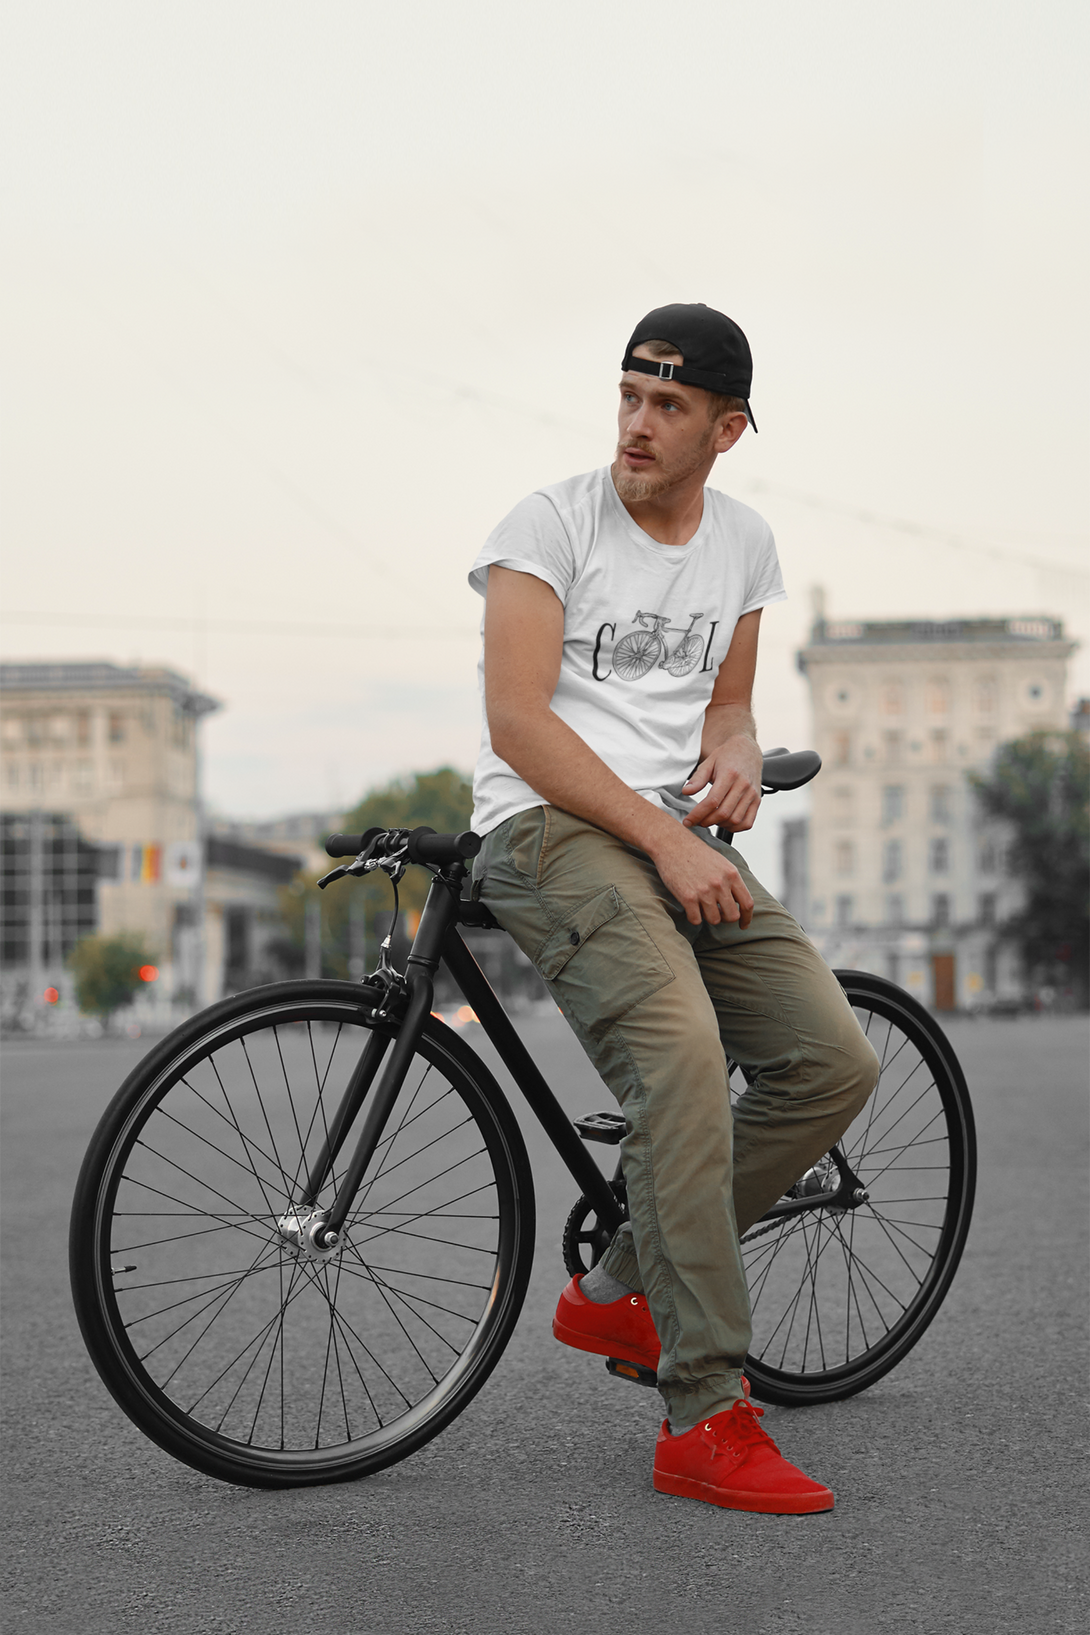 Cycle Coolness Printed T-Shirt For Men - WowWaves - 3